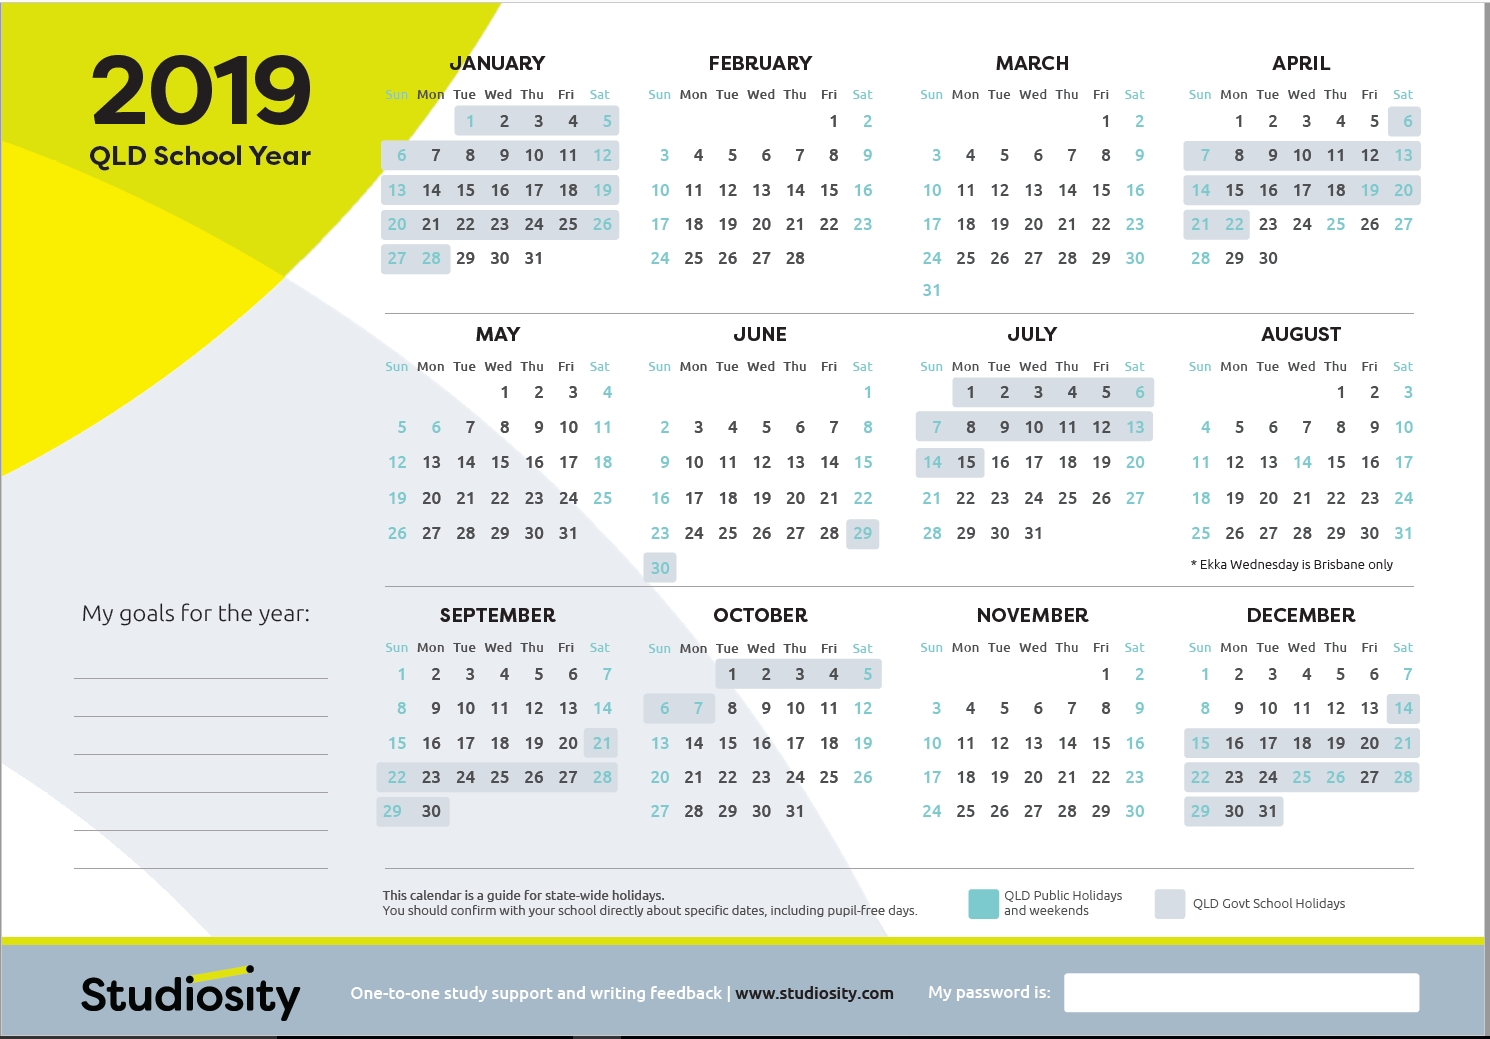 School Terms And Public Holiday Dates For Qld In 2019 | Studiosity Year 12 School Calendar Qld